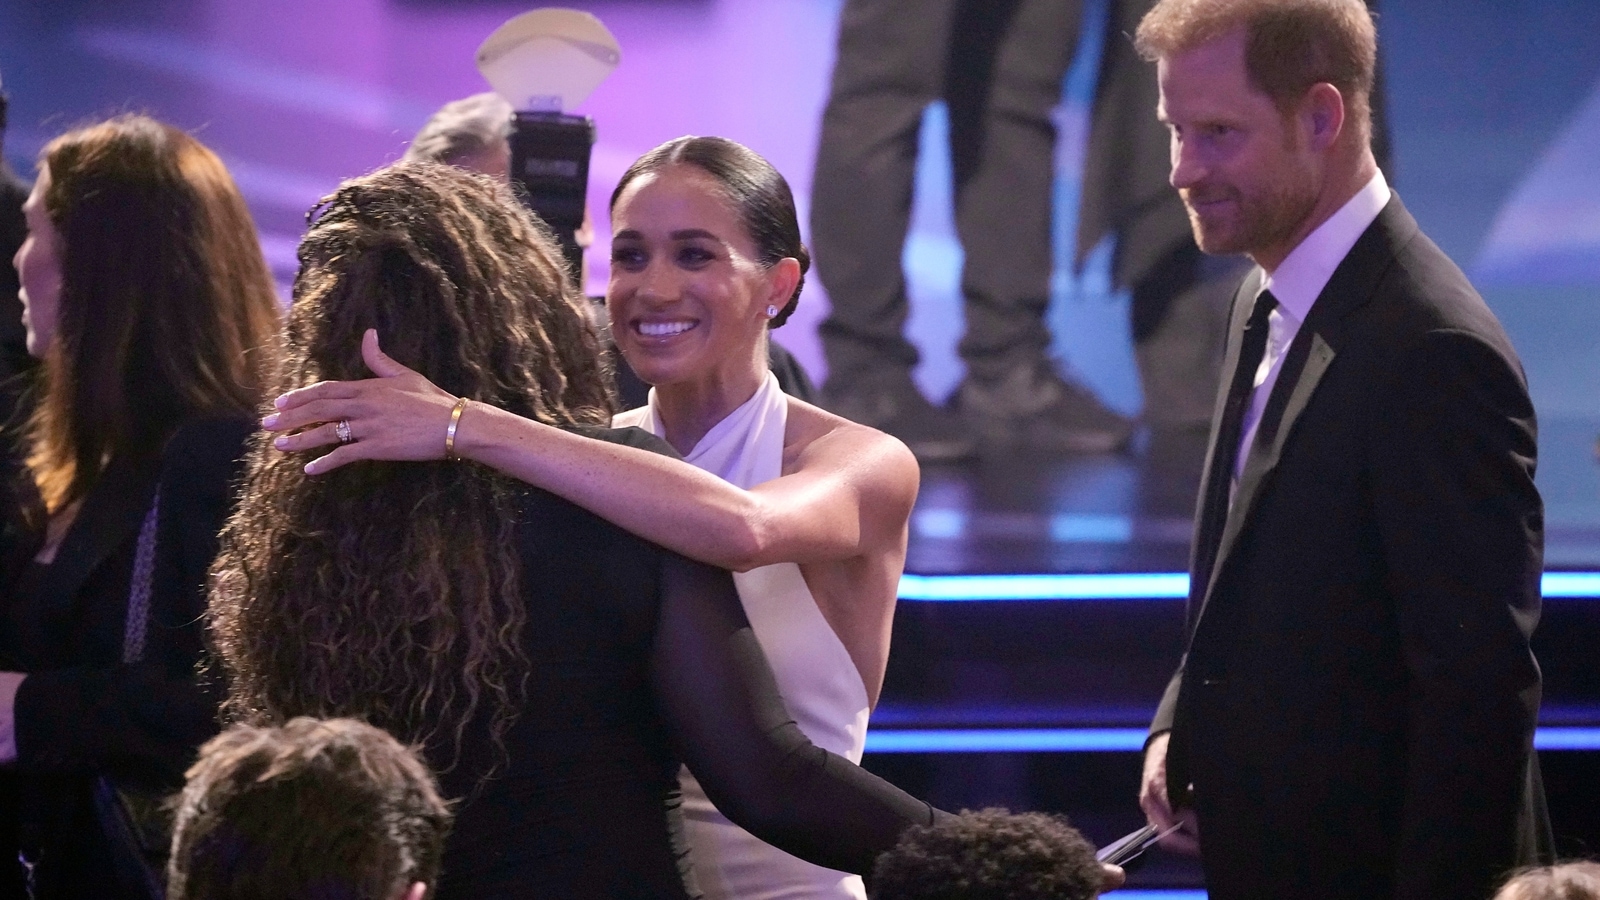 Prince Harry and Meghan awkwardly smile at Serena Williams' brutal ‘this is my night’ remark